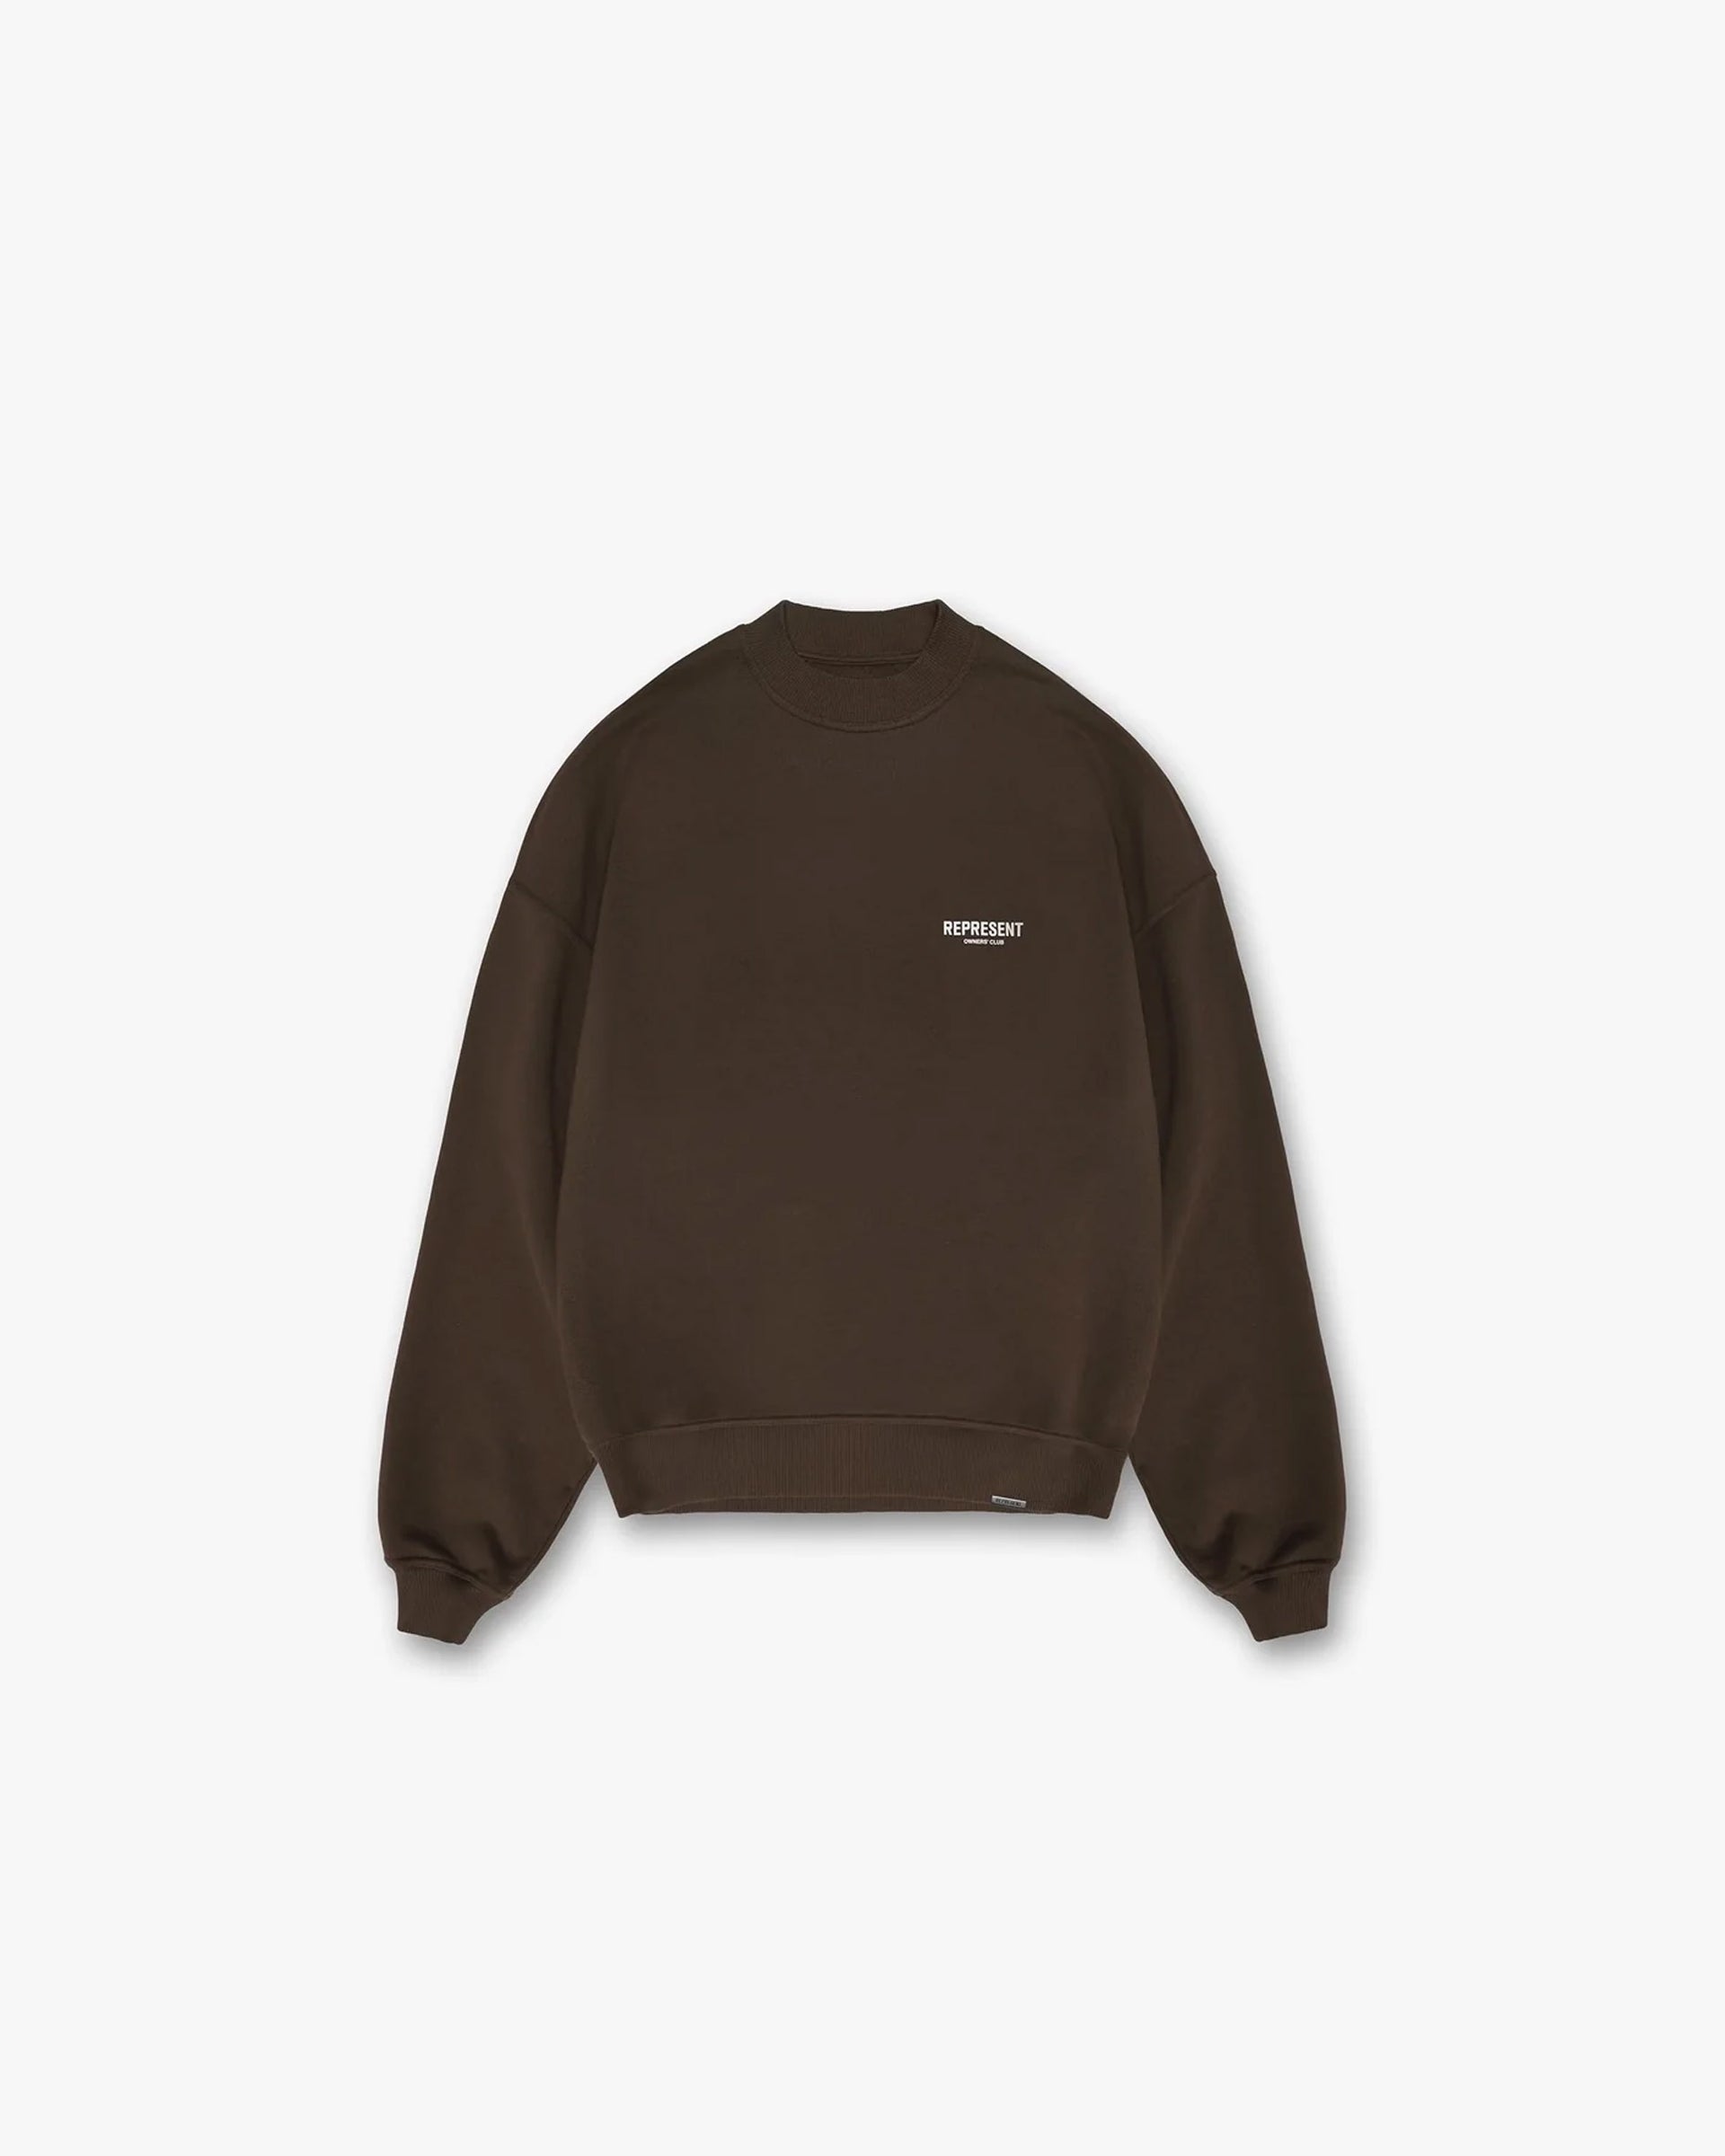 Represent Owners Club Sweater | Brown Sweaters Owners Club | Represent Clo